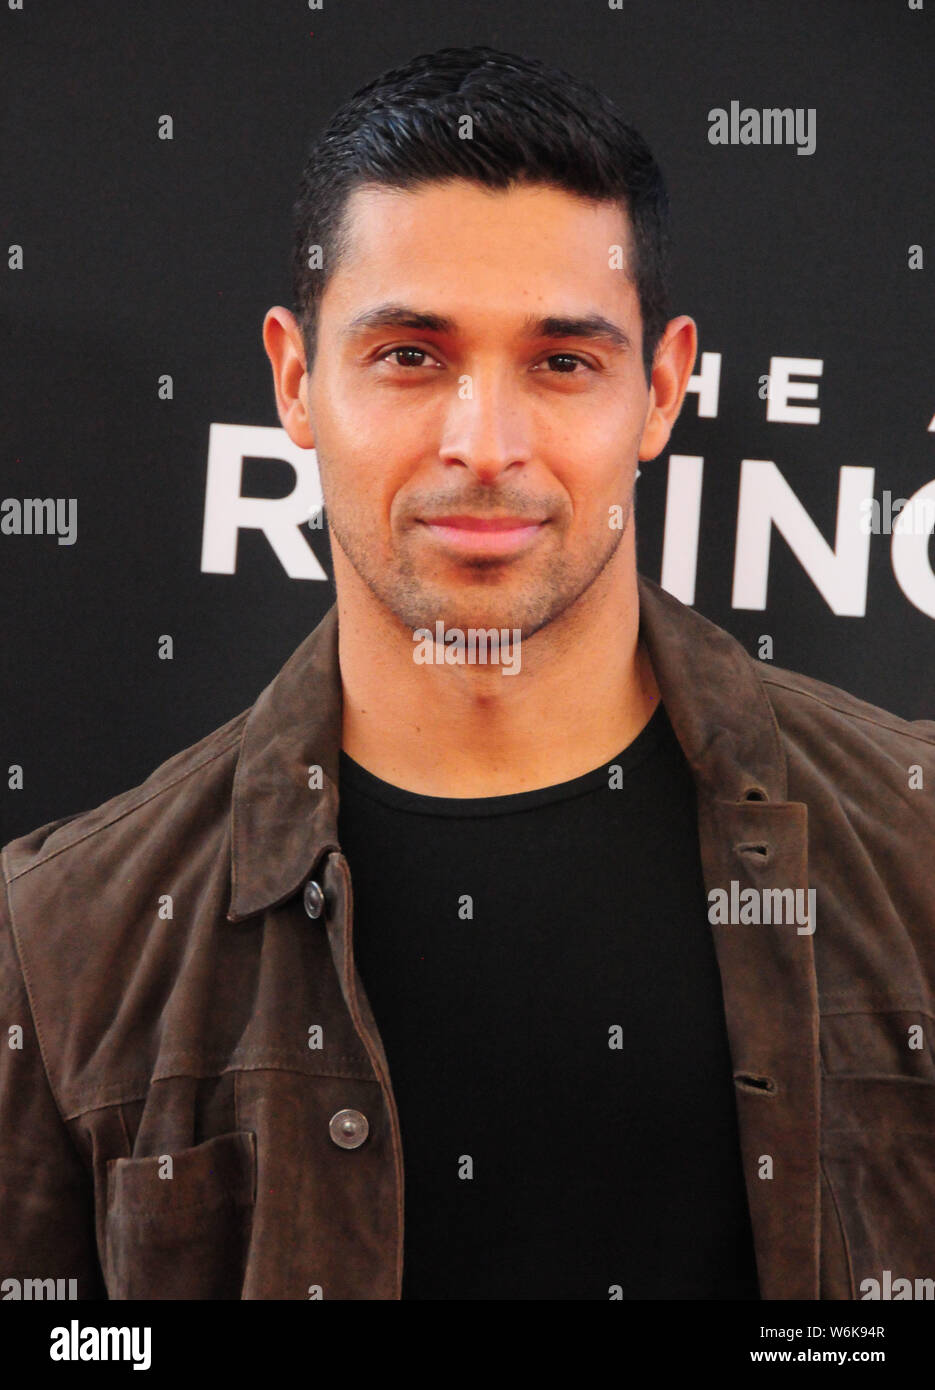 Hollywood, California, USA 1st August 2019 Actor Wilmer Valderrama attends 20th Century Fox's World Premiere of 'The Art Of Racing In The Rain' on August 1, 2019 at the El Capitan Theatre in Hollywood, California, USA. Photo by Barry King/Alamy Live News Stock Photo